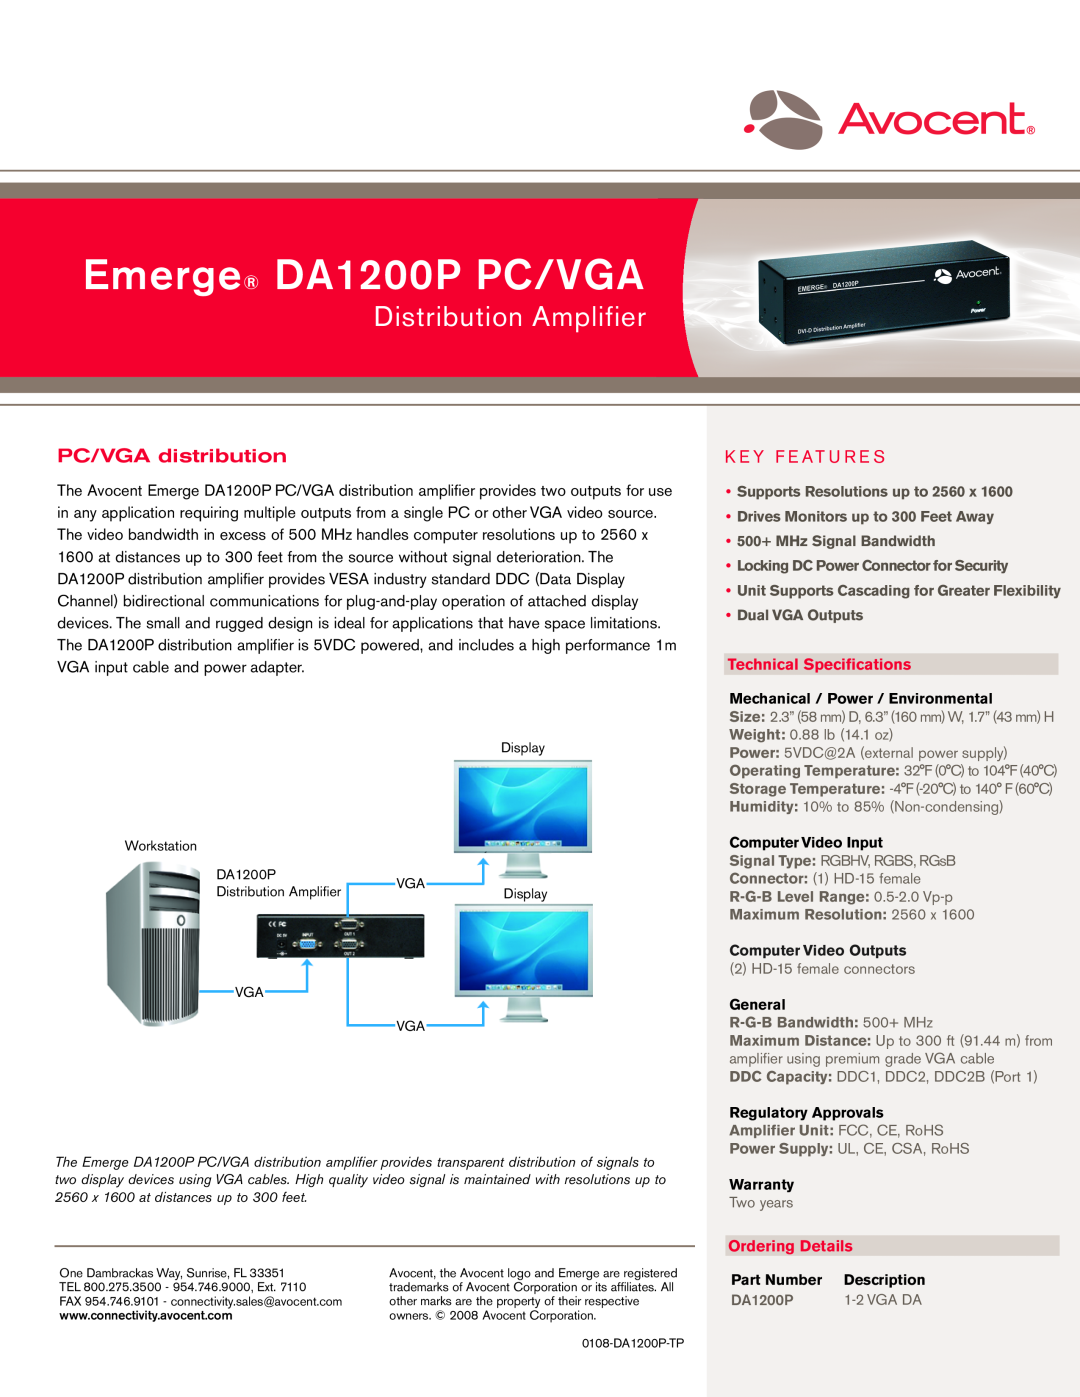 Avocent technical specifications Emerge DA1200P PC/VGA, Distribution Amplifier, PC/VGA distribution, Ordering Details 